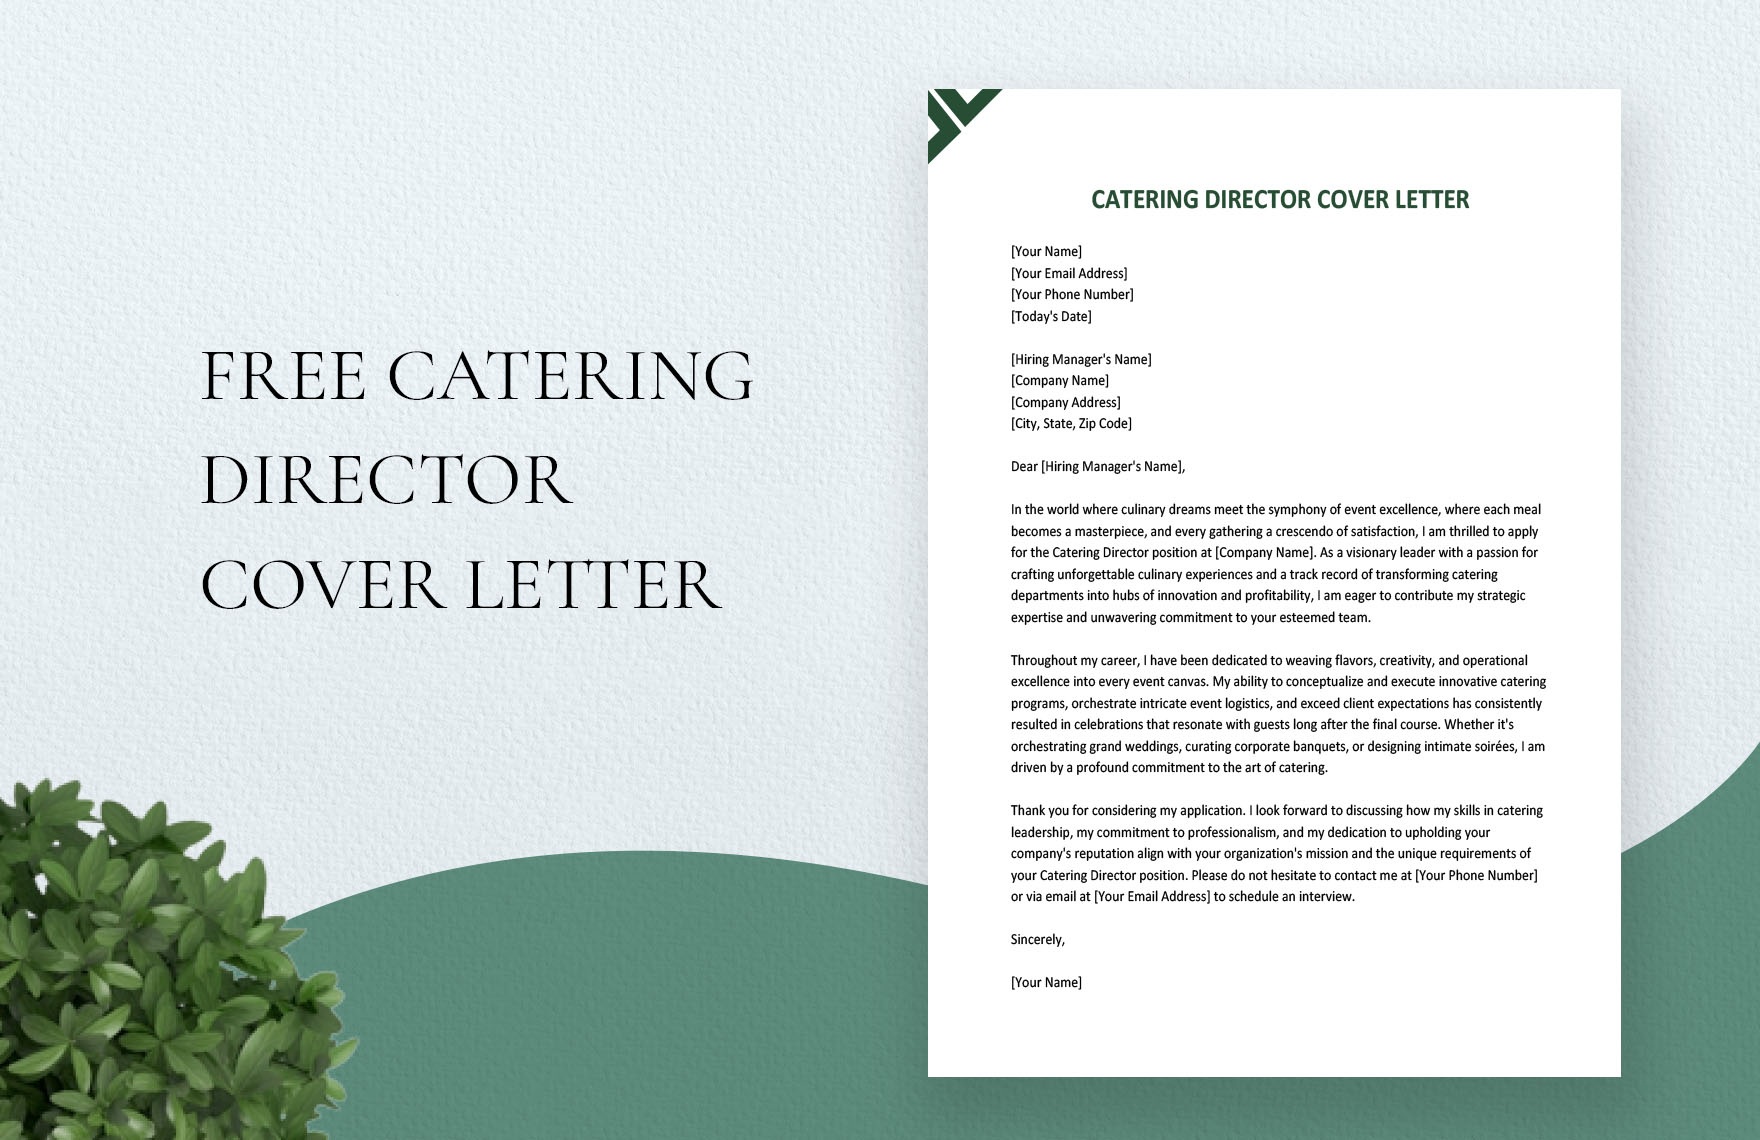 Catering Director Cover Letter